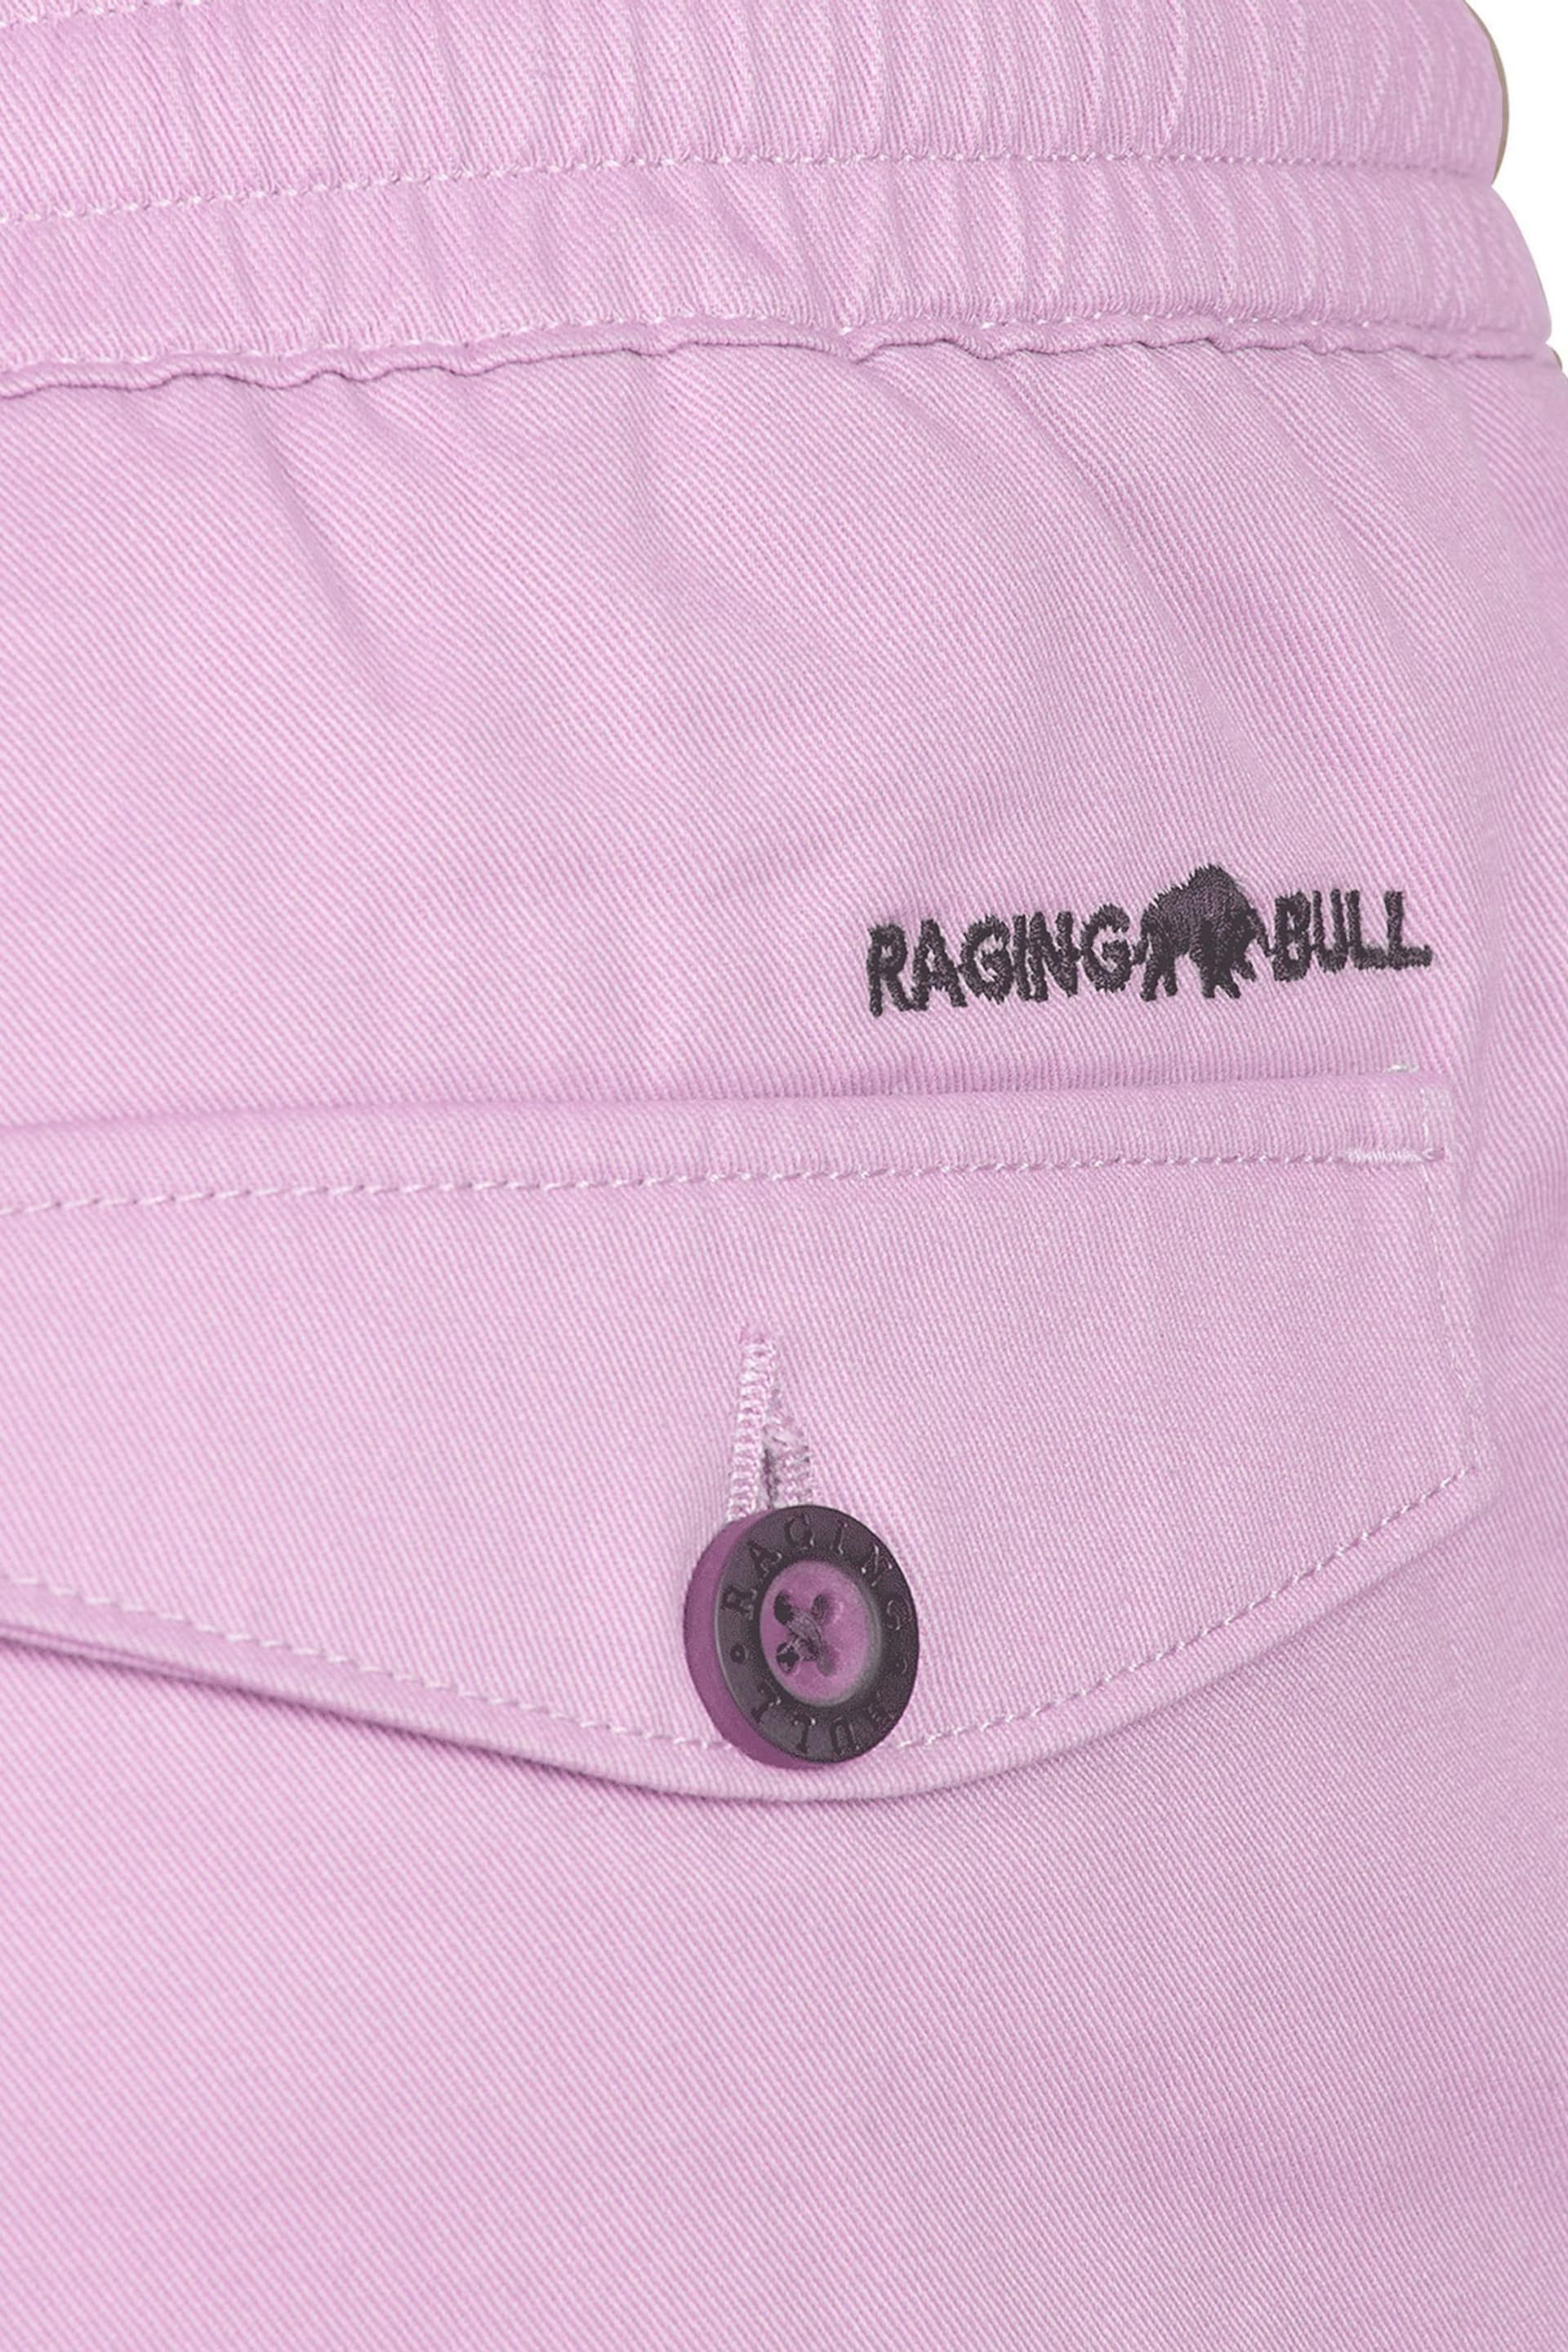 Raging Bull Pink Stretch Chino Shorts - Image 6 of 6